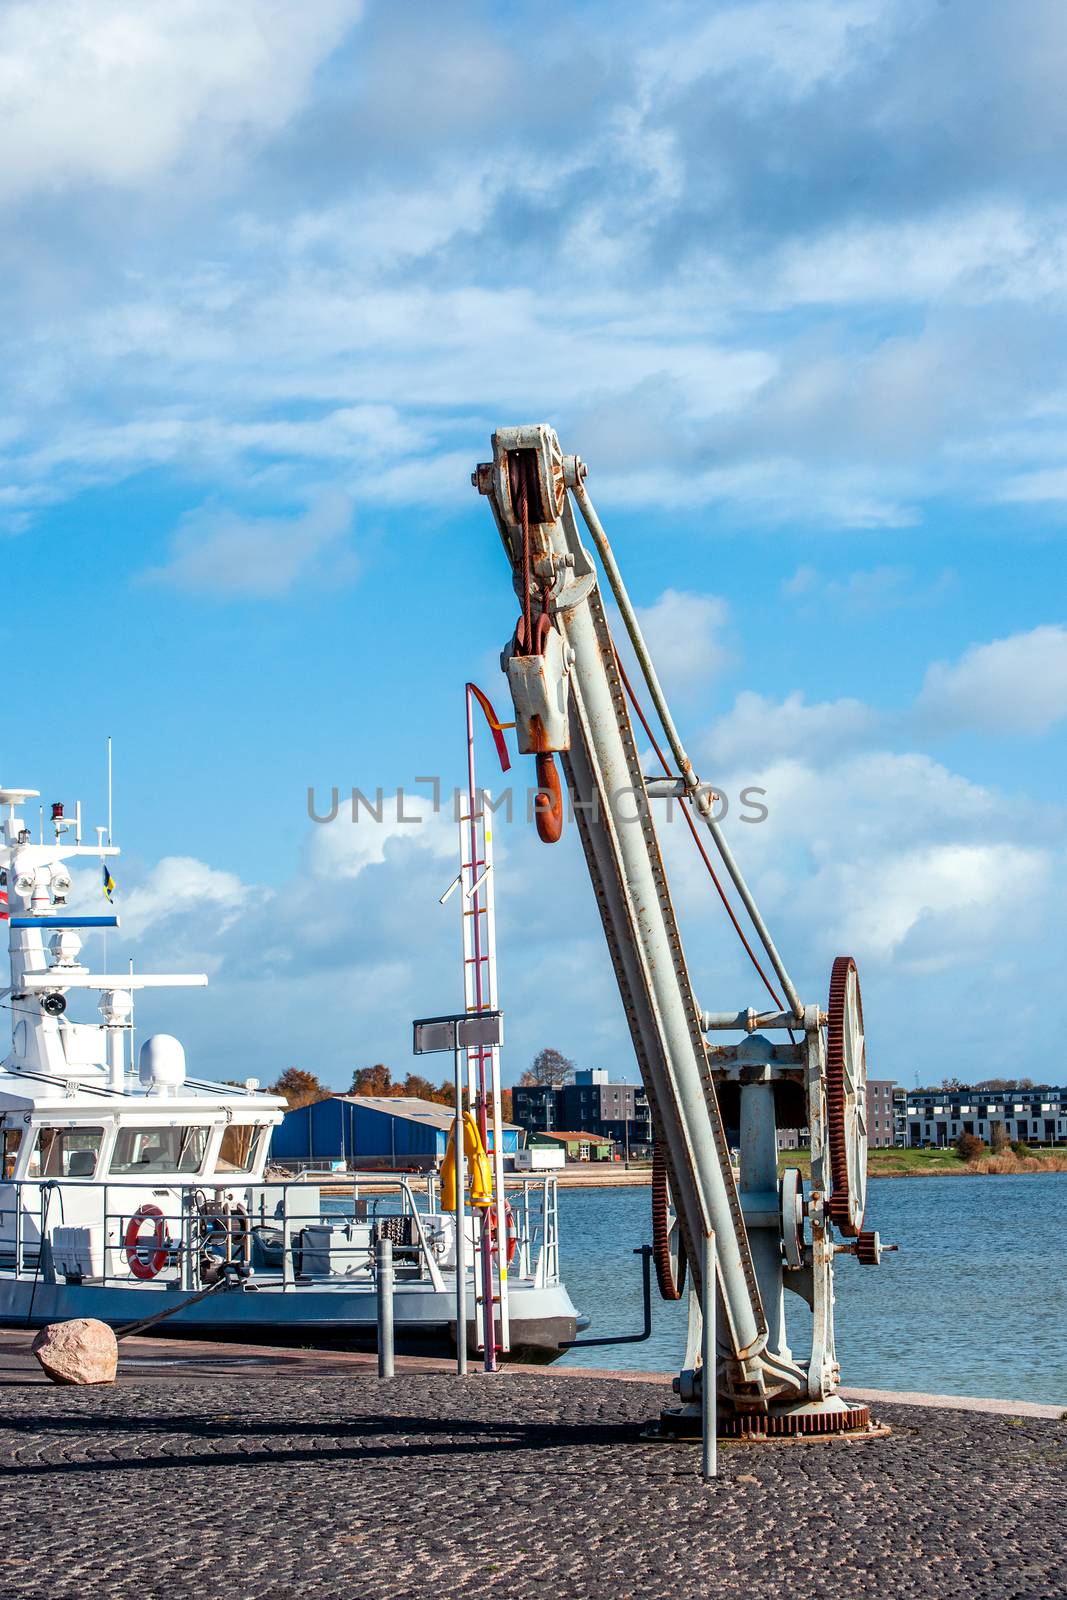 Shipping crane at the harbor by Sportactive